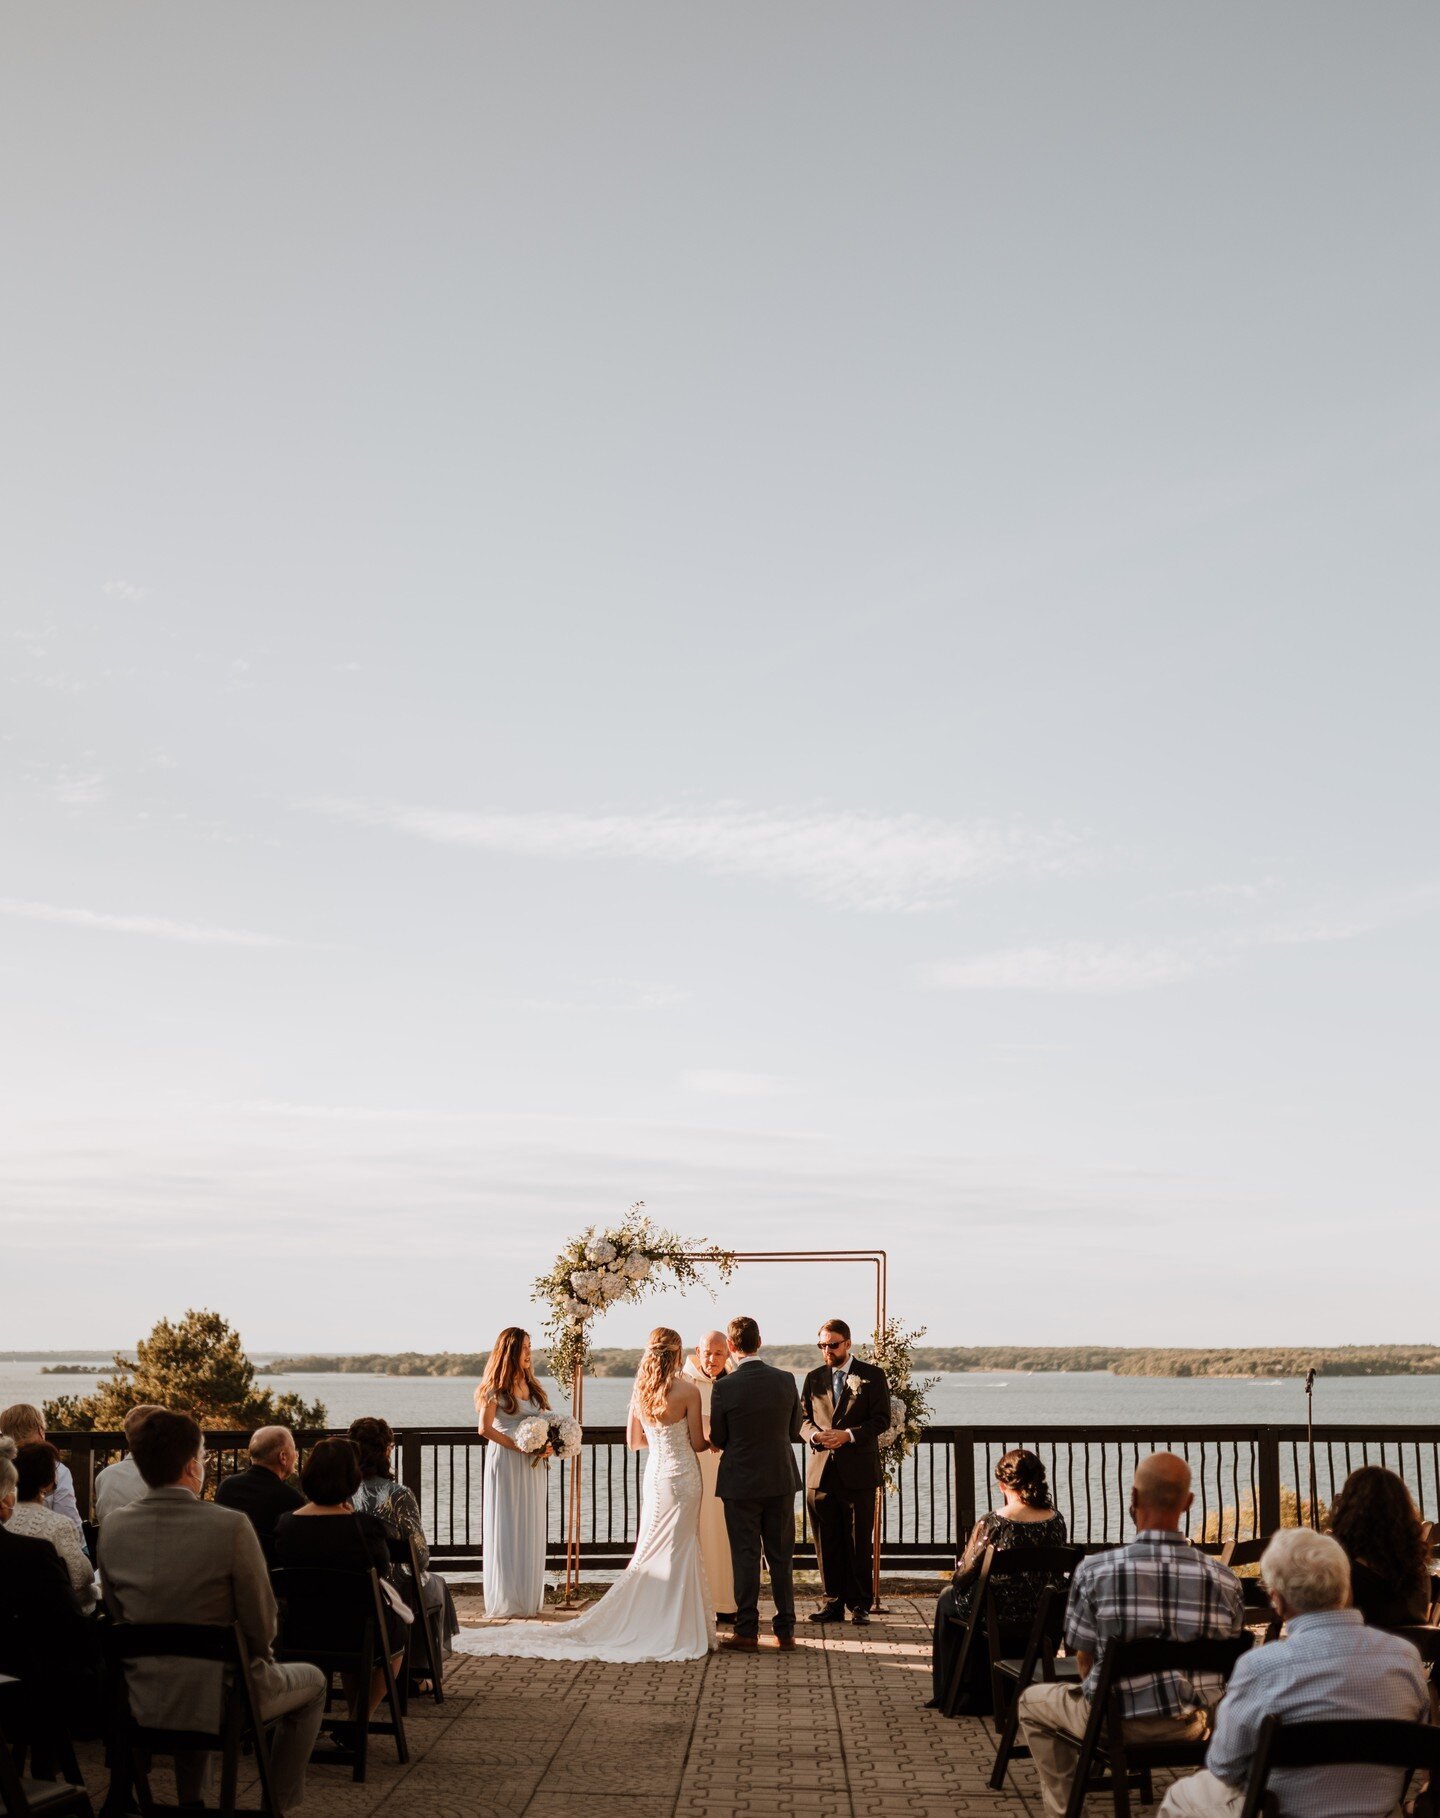 Deciding on whether to have a large wedding is not solely based on how many people you know and love. It also depends on the type of experience you want to share with your partner throughout the wedding planning process and the wedding day itself. 

